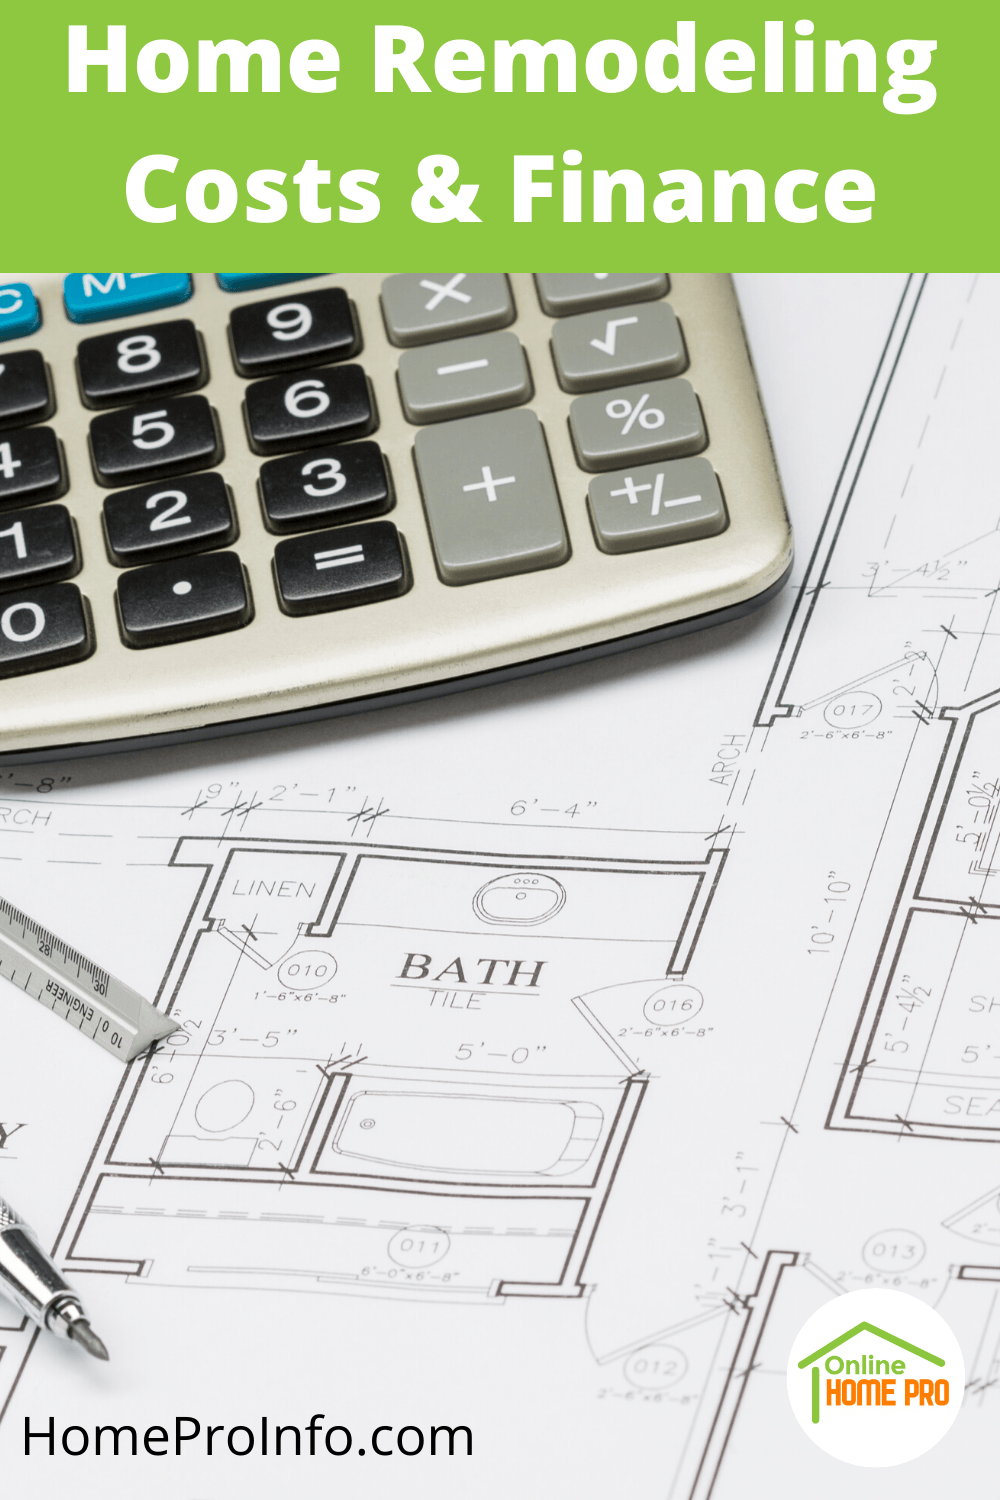 Home Remodeling Costs & Finance